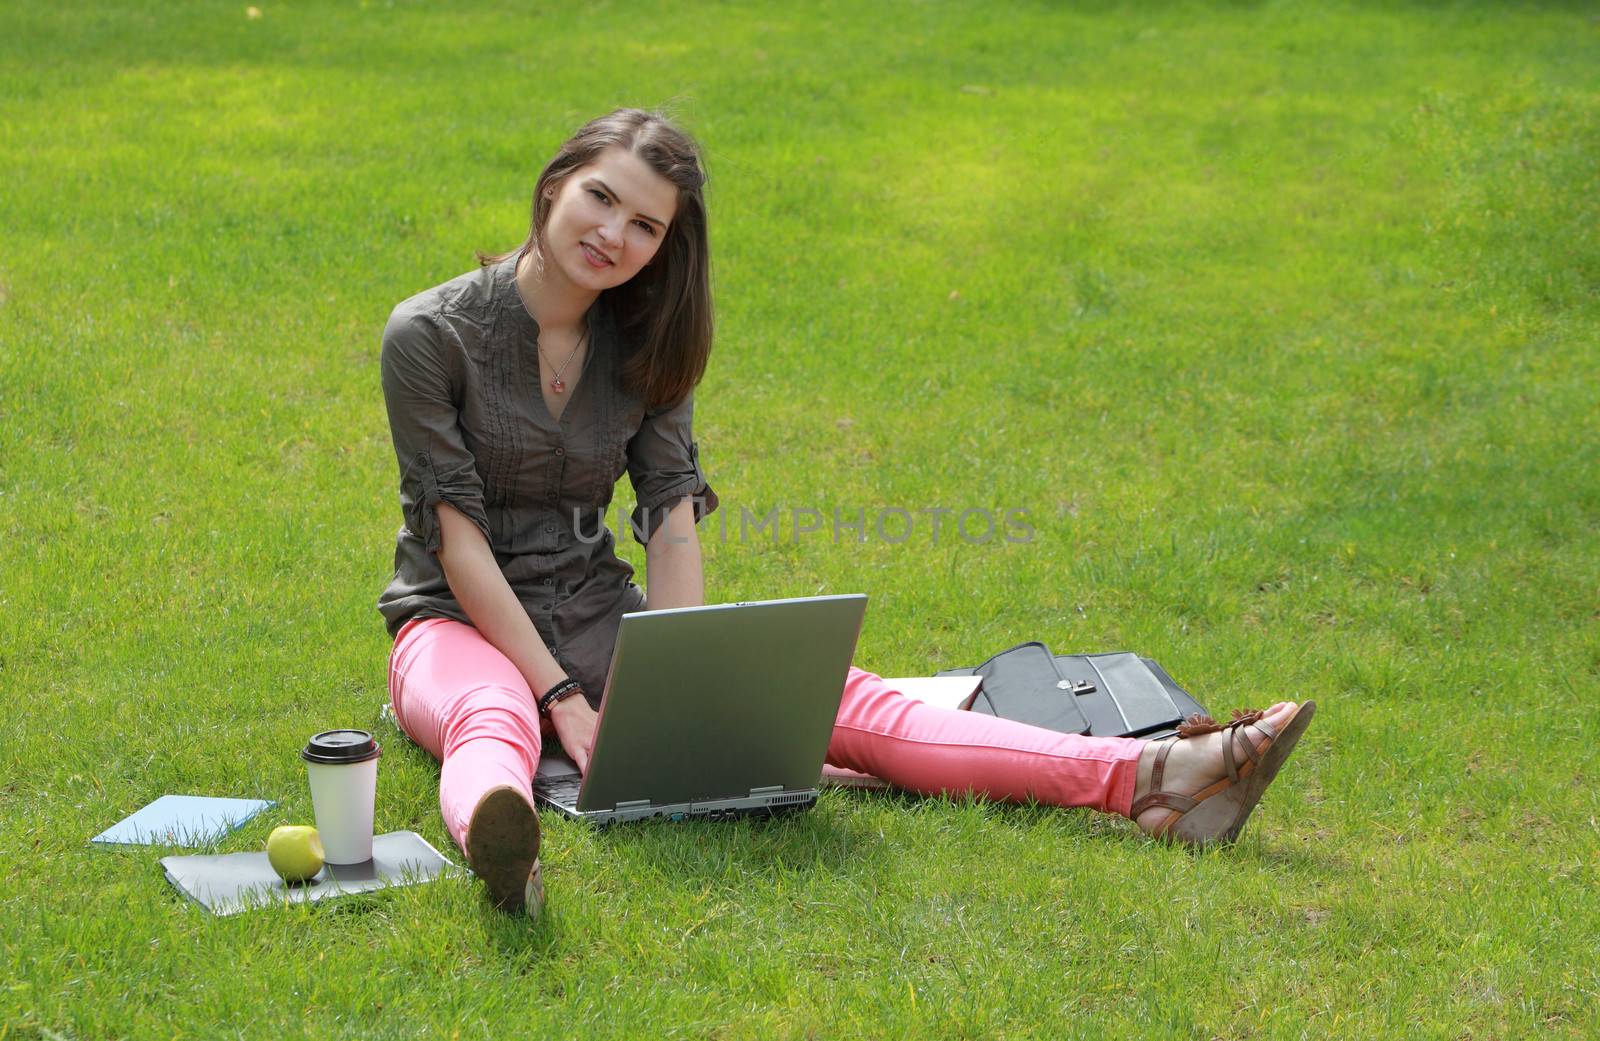 Woman with a Laptop in Grass by RazvanPhotography